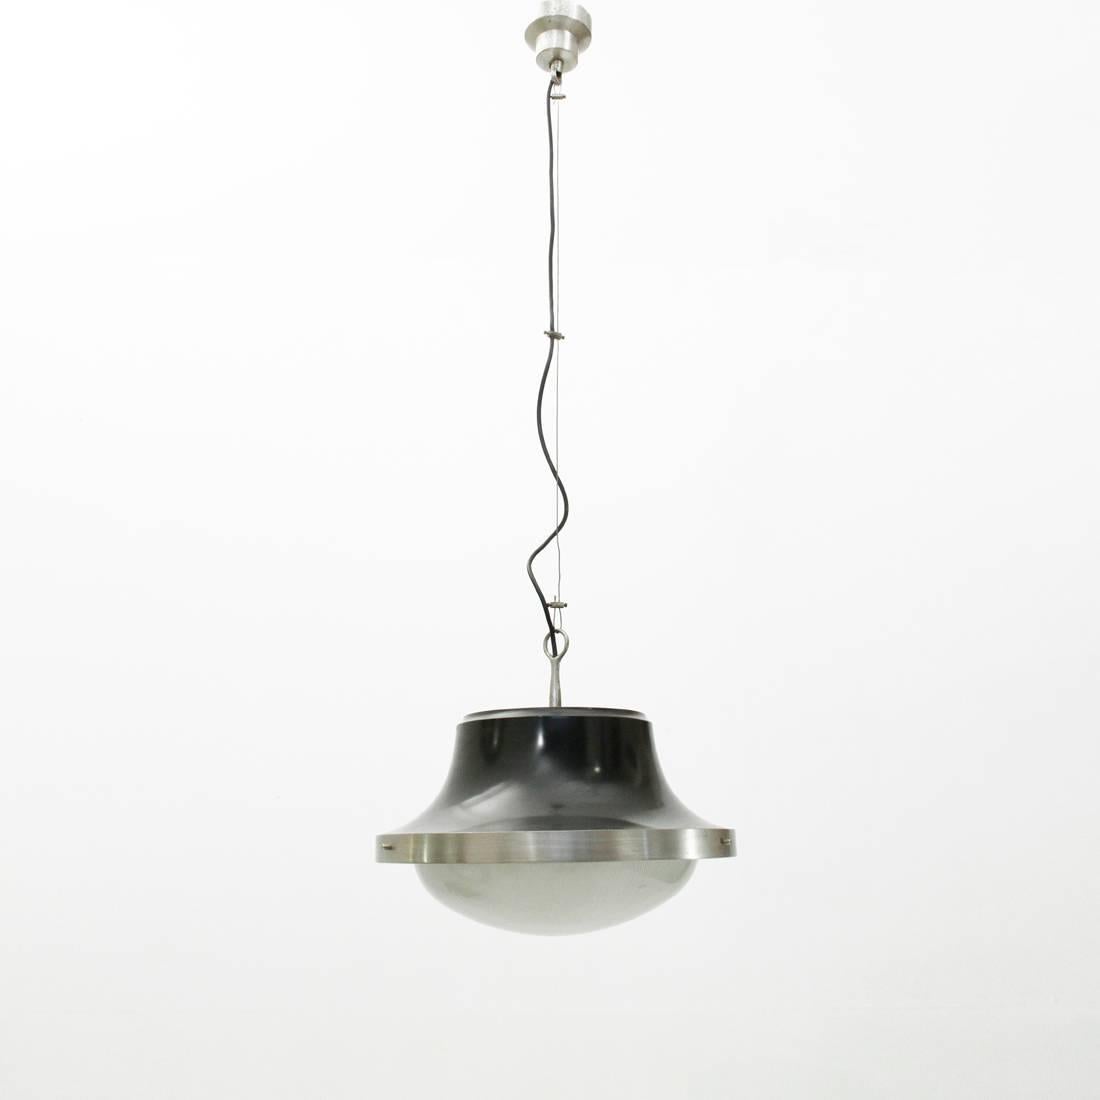 Chandelier produced by Artemide and designed by Sergio Mazza for the XII Triennale of Milan.
Diffuser in black painted aluminum.
Pressed glass cup.
Rosette and hook in nickel-plated brass.
Good condition, some signs due to normal use over